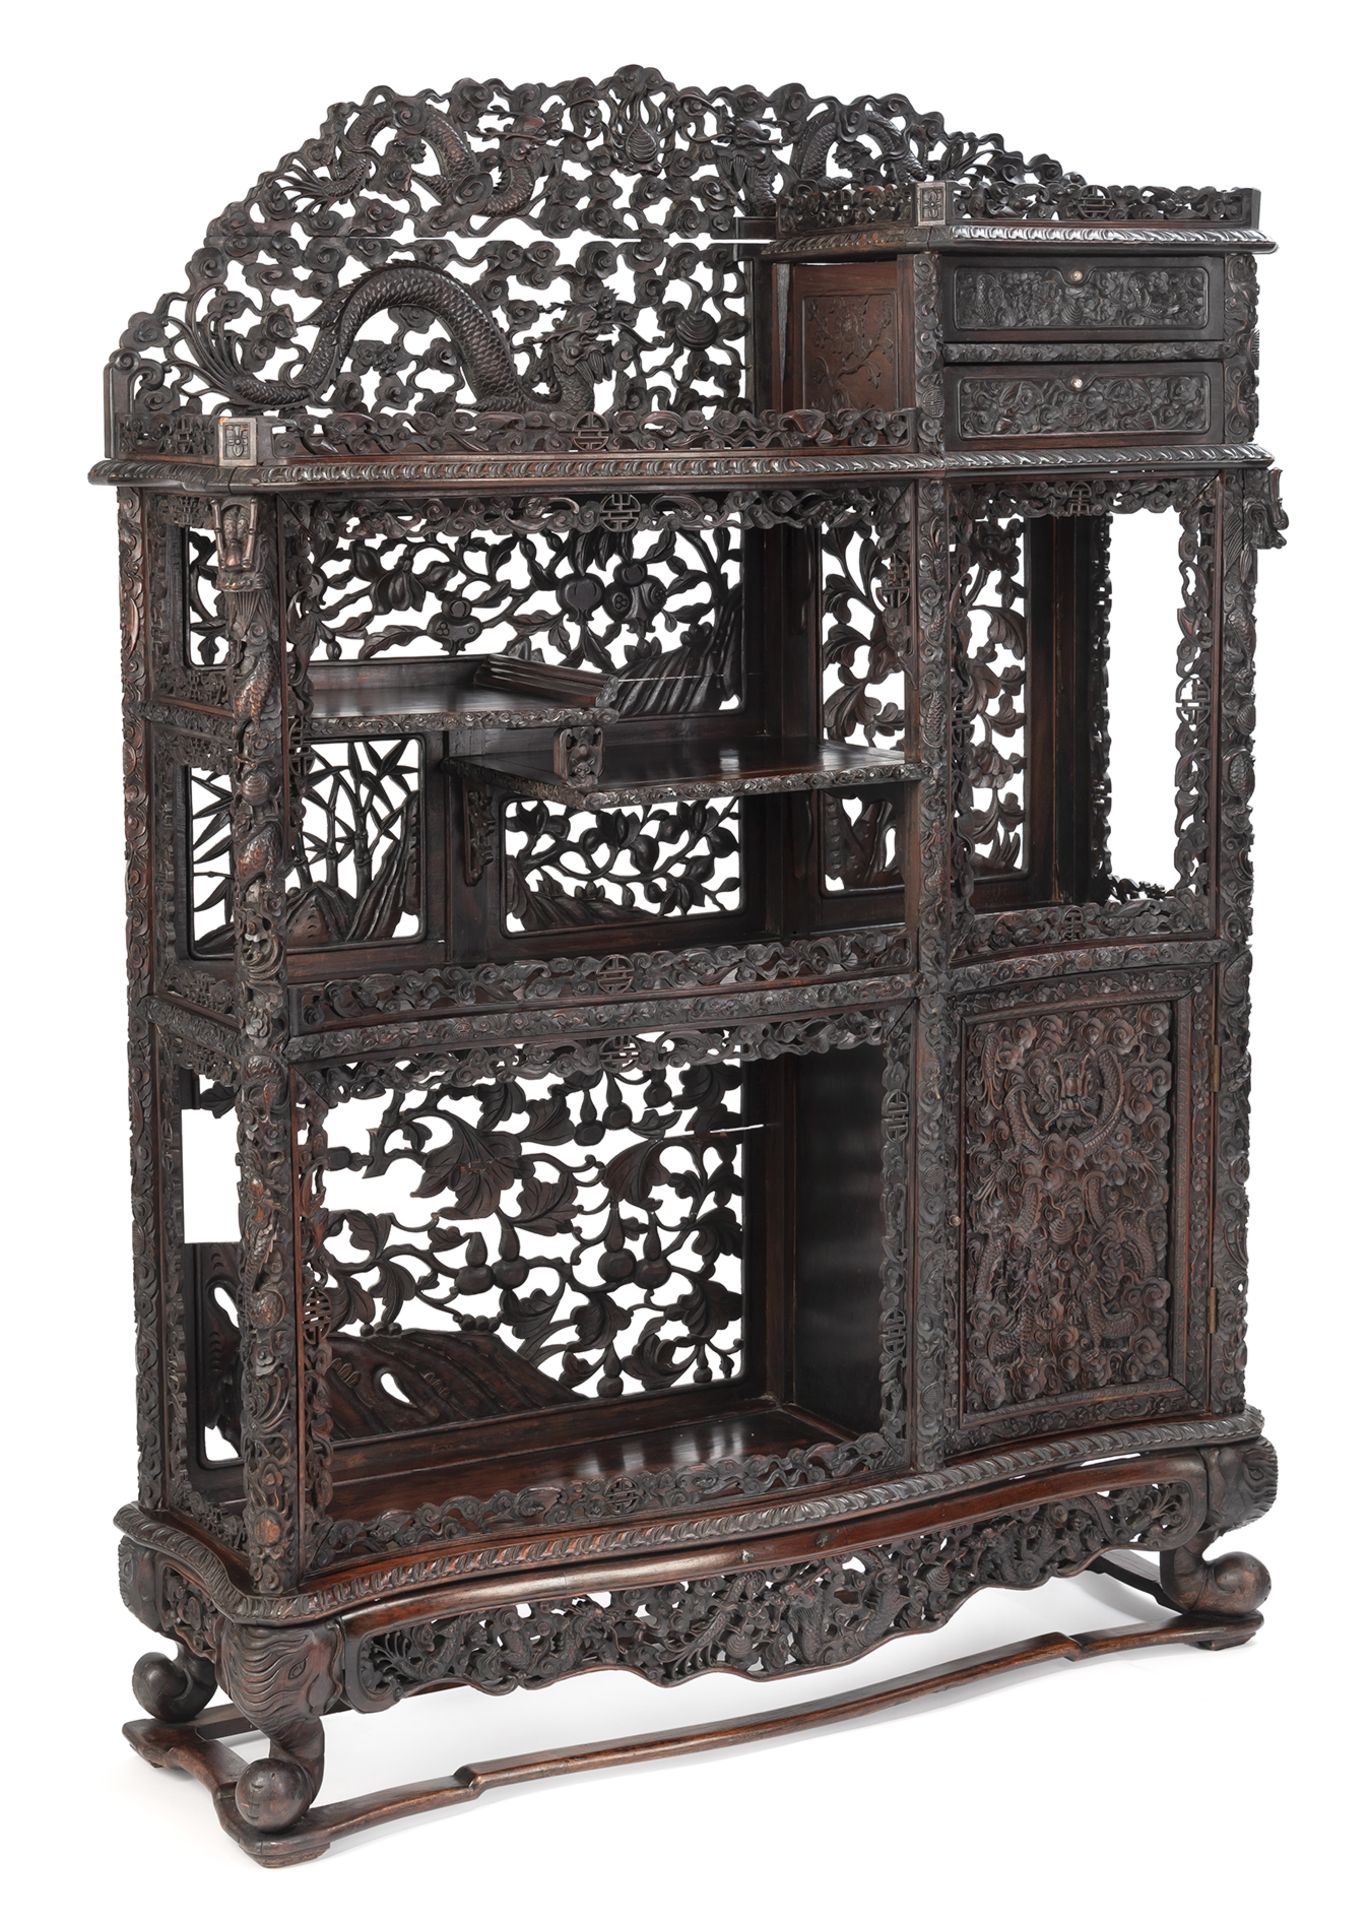 AN INTRICATELY CARVED OPENWORK DRAGON, QILIN, BAMBOO AND POMEGRANATE DISPLAY CABINET